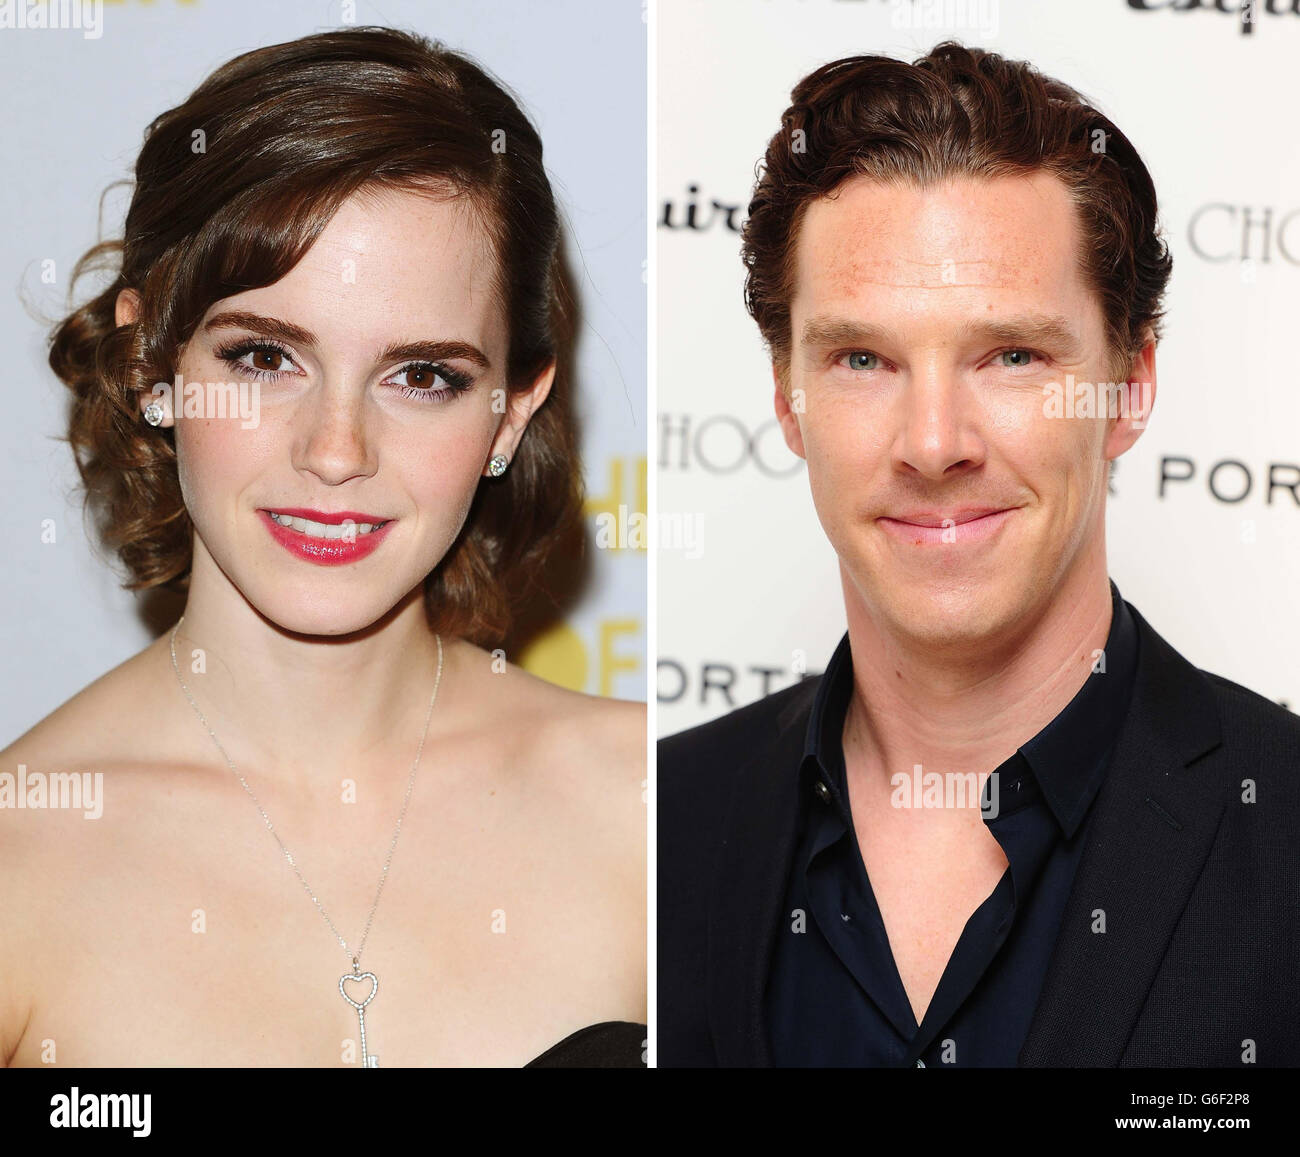 Undated file photos of Emma Watson and Benedict Cumberbatch who have been named the world's sexiest film stars. Stock Photo